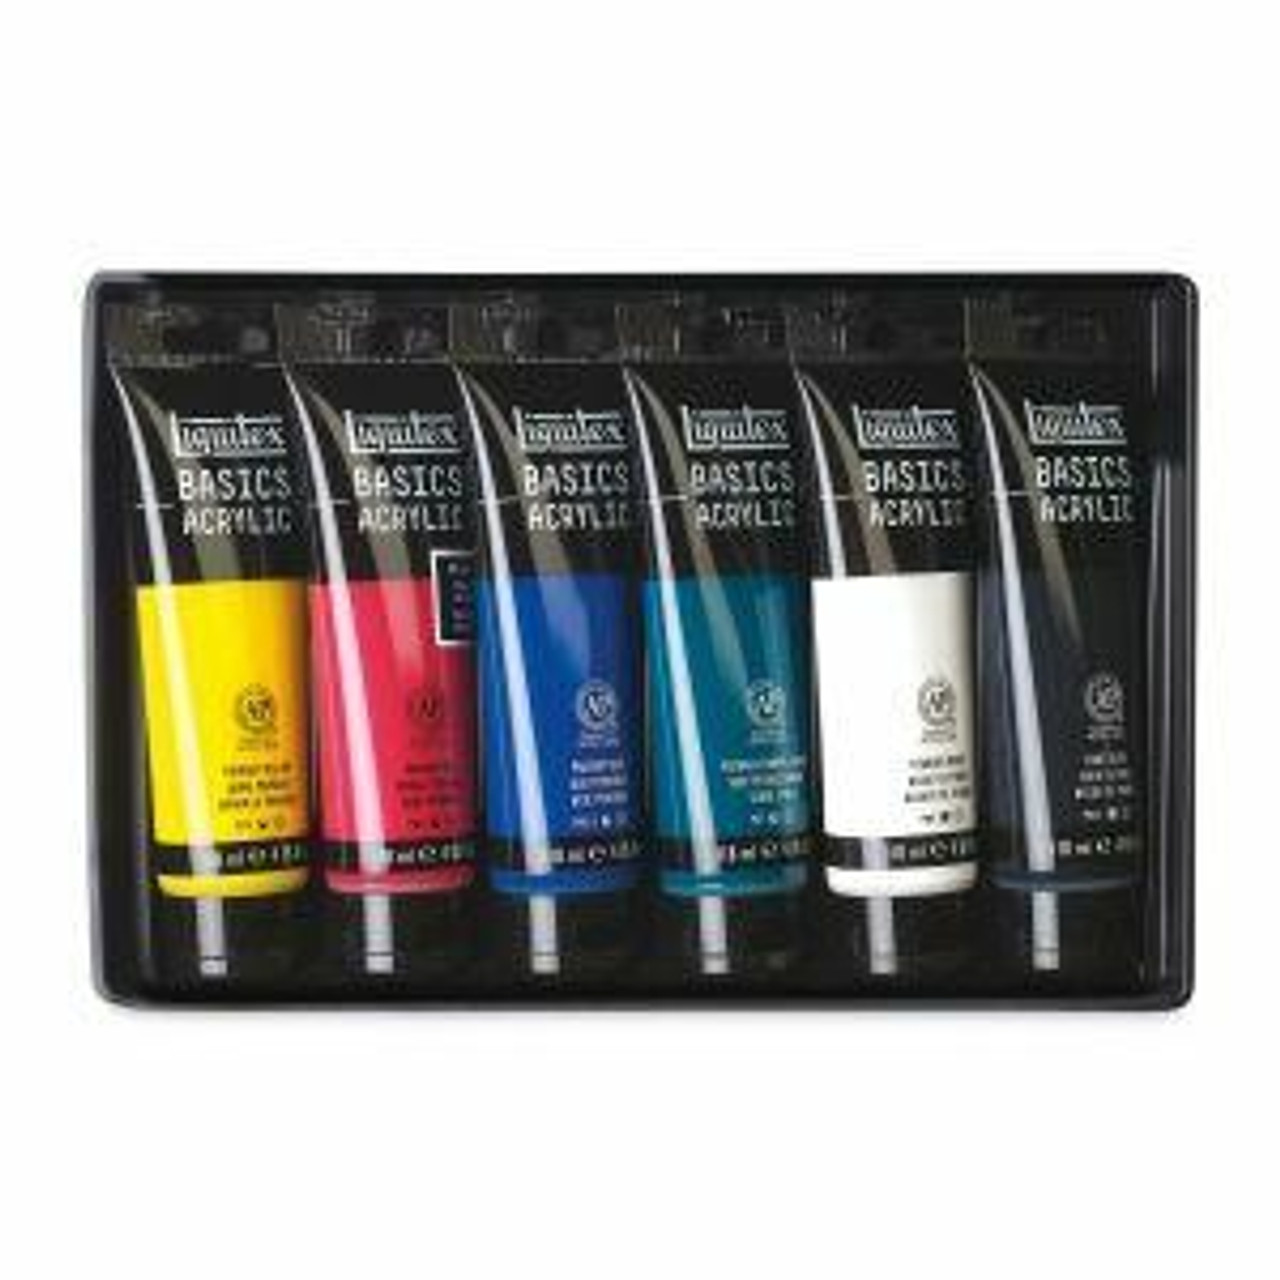  Daler Rowney System3 Mars Black 150ml Acrylic Paint Tube -  Acrylic Painting Supplies for Artists and Students - Artist Paint for  Murals Canvas and More - Art Paint for All